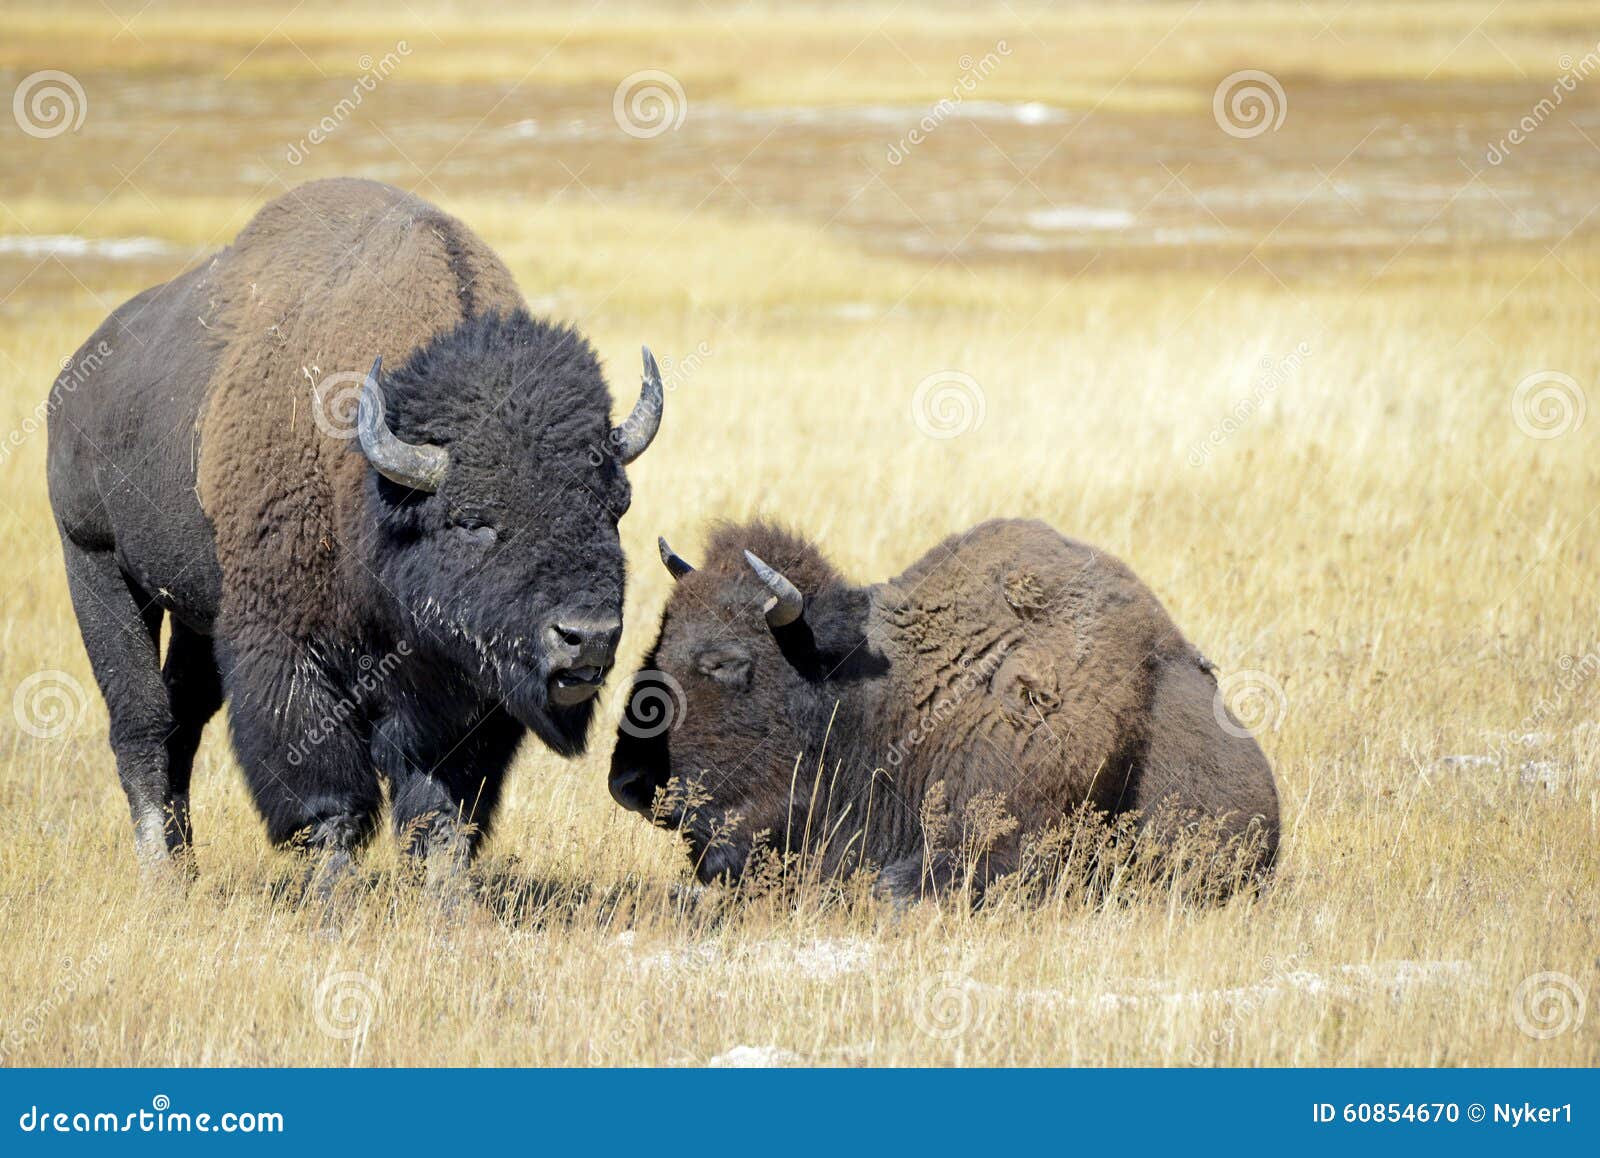 bison at yellowstone national park, wyoming